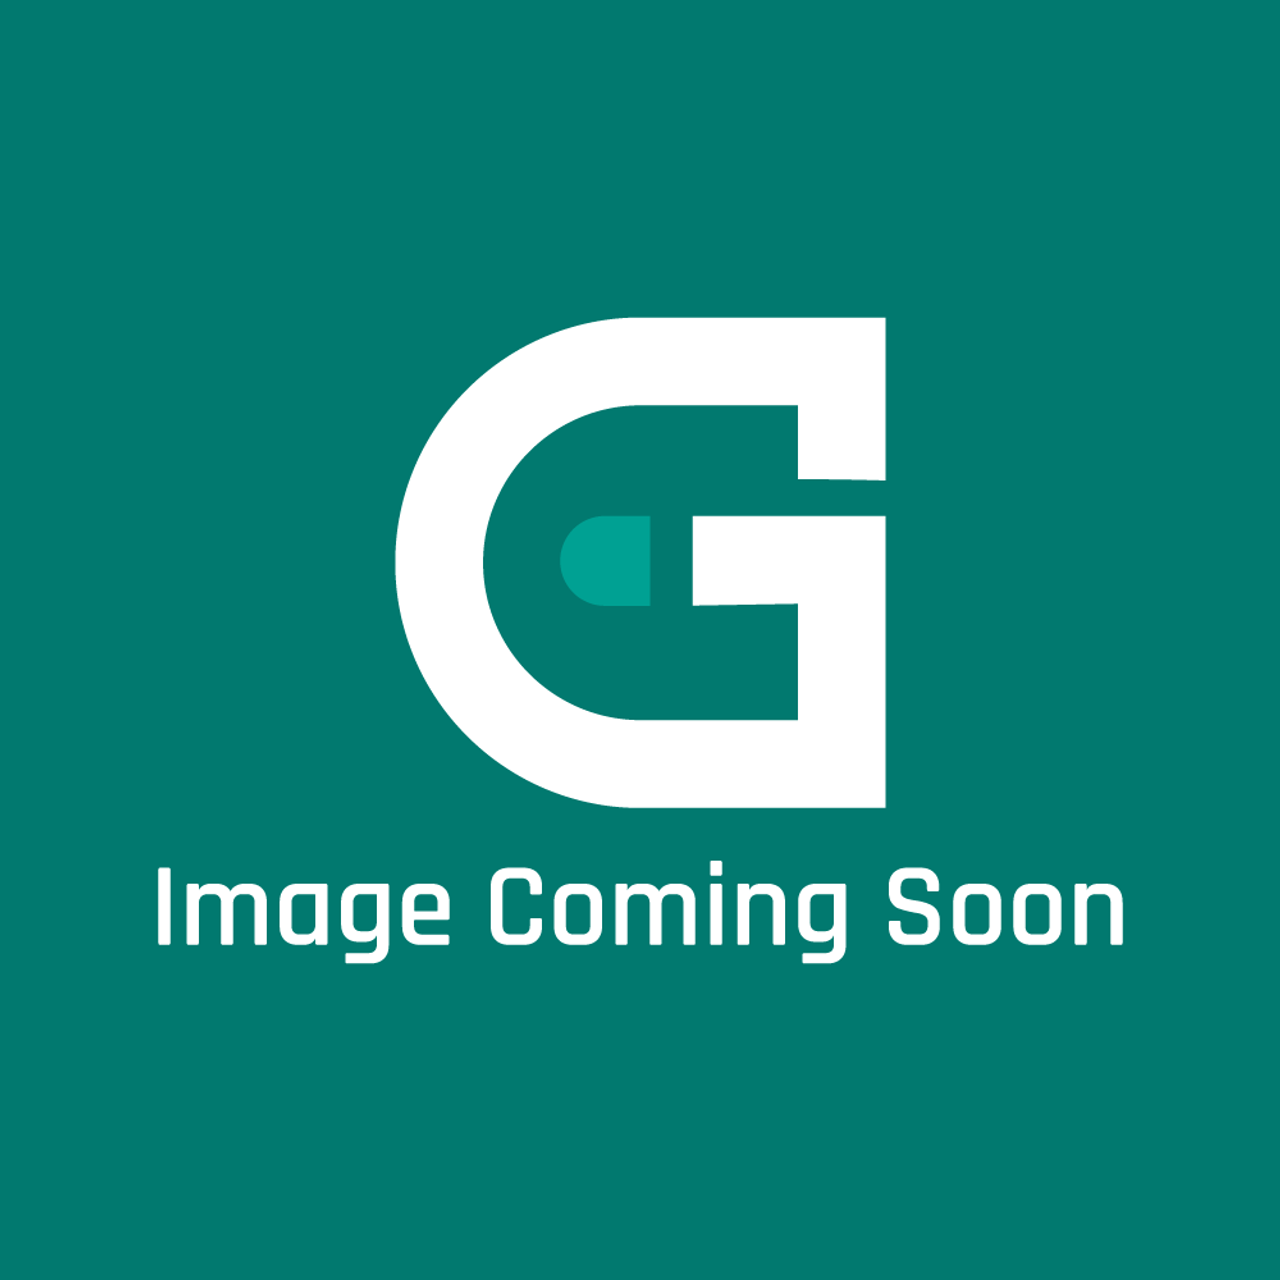 Frigidaire - Electrolux 5304501061 Cover - Image Coming Soon!